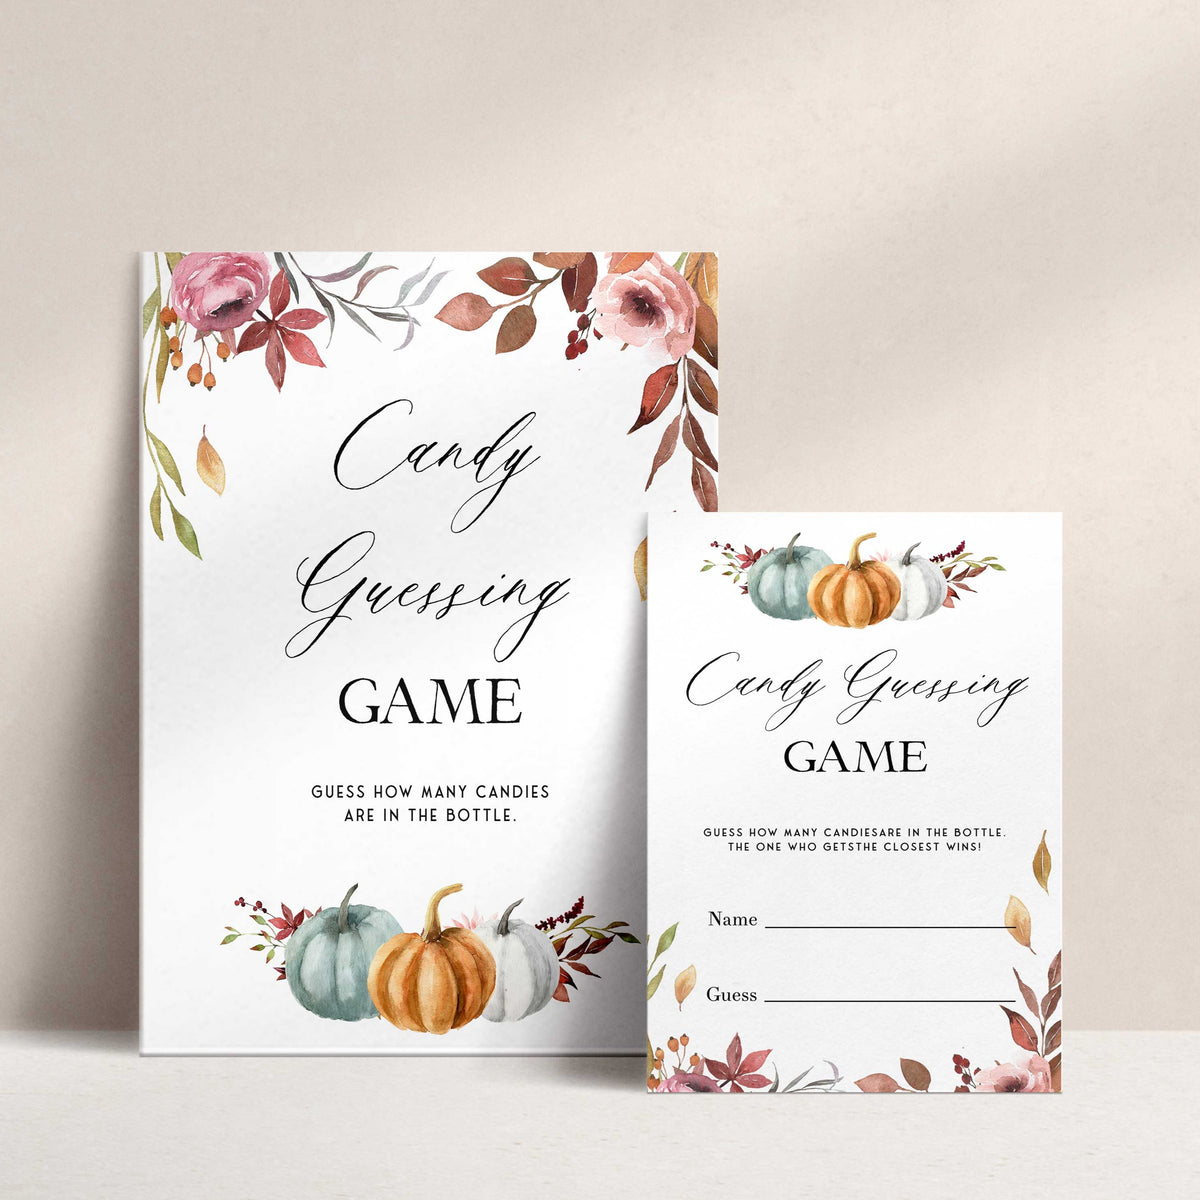 Fully editable and printable baby shower candy guessing game with a fall pumpkin design. Perfect for a Fall Pumpkin baby shower themed party